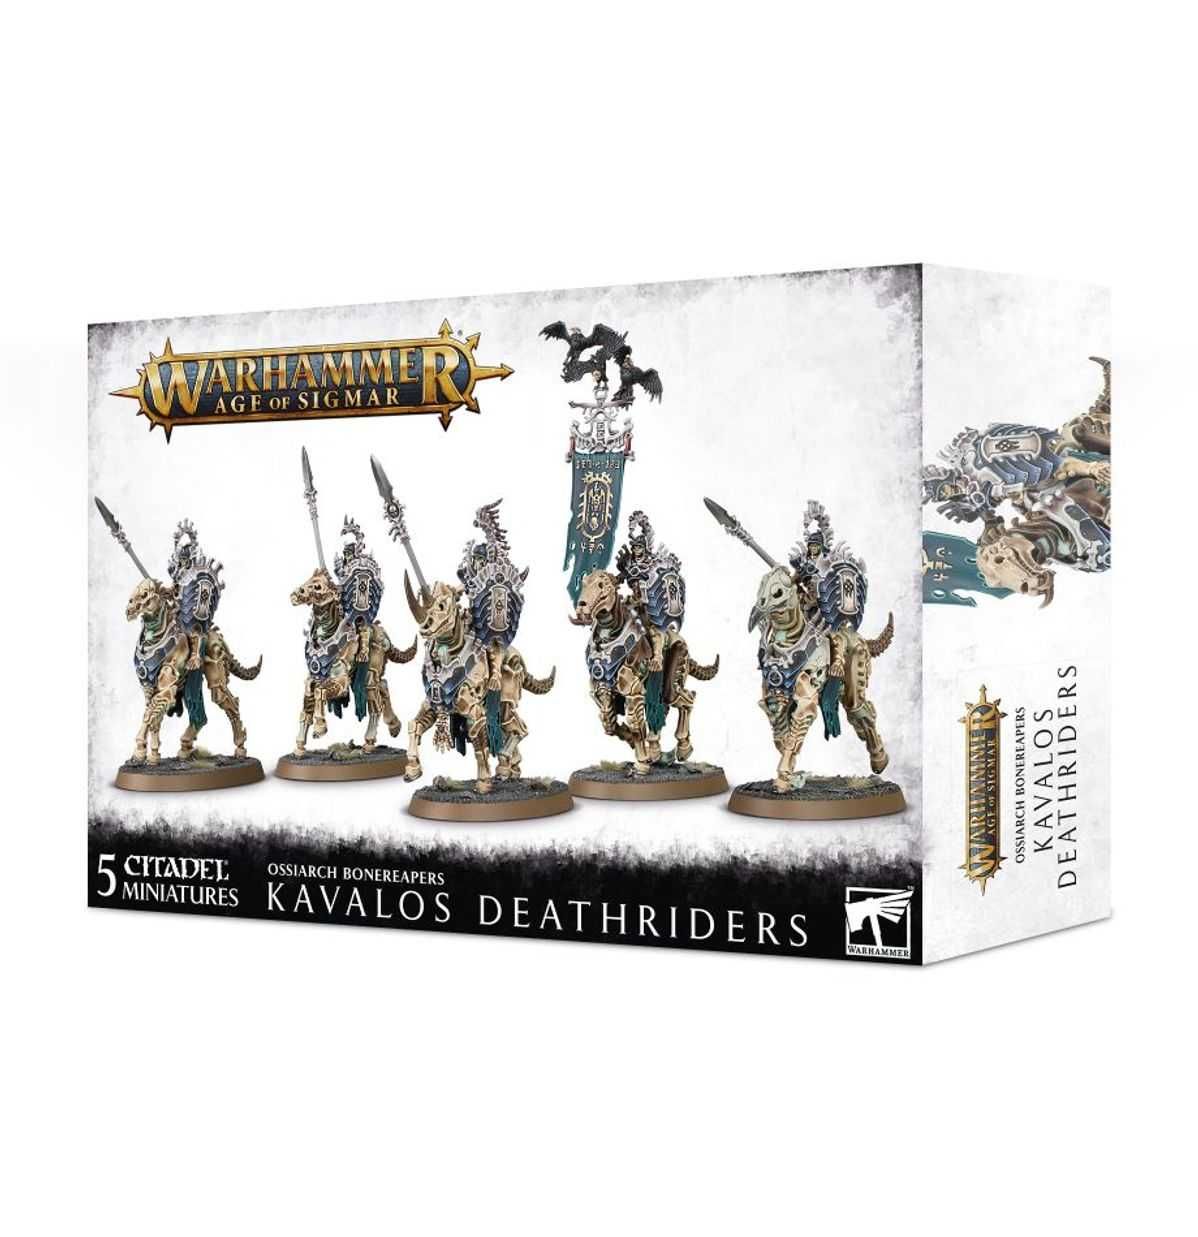 Warhammer Age of Sigmar Ossiarch Bonereapers Kavalos Deathriders